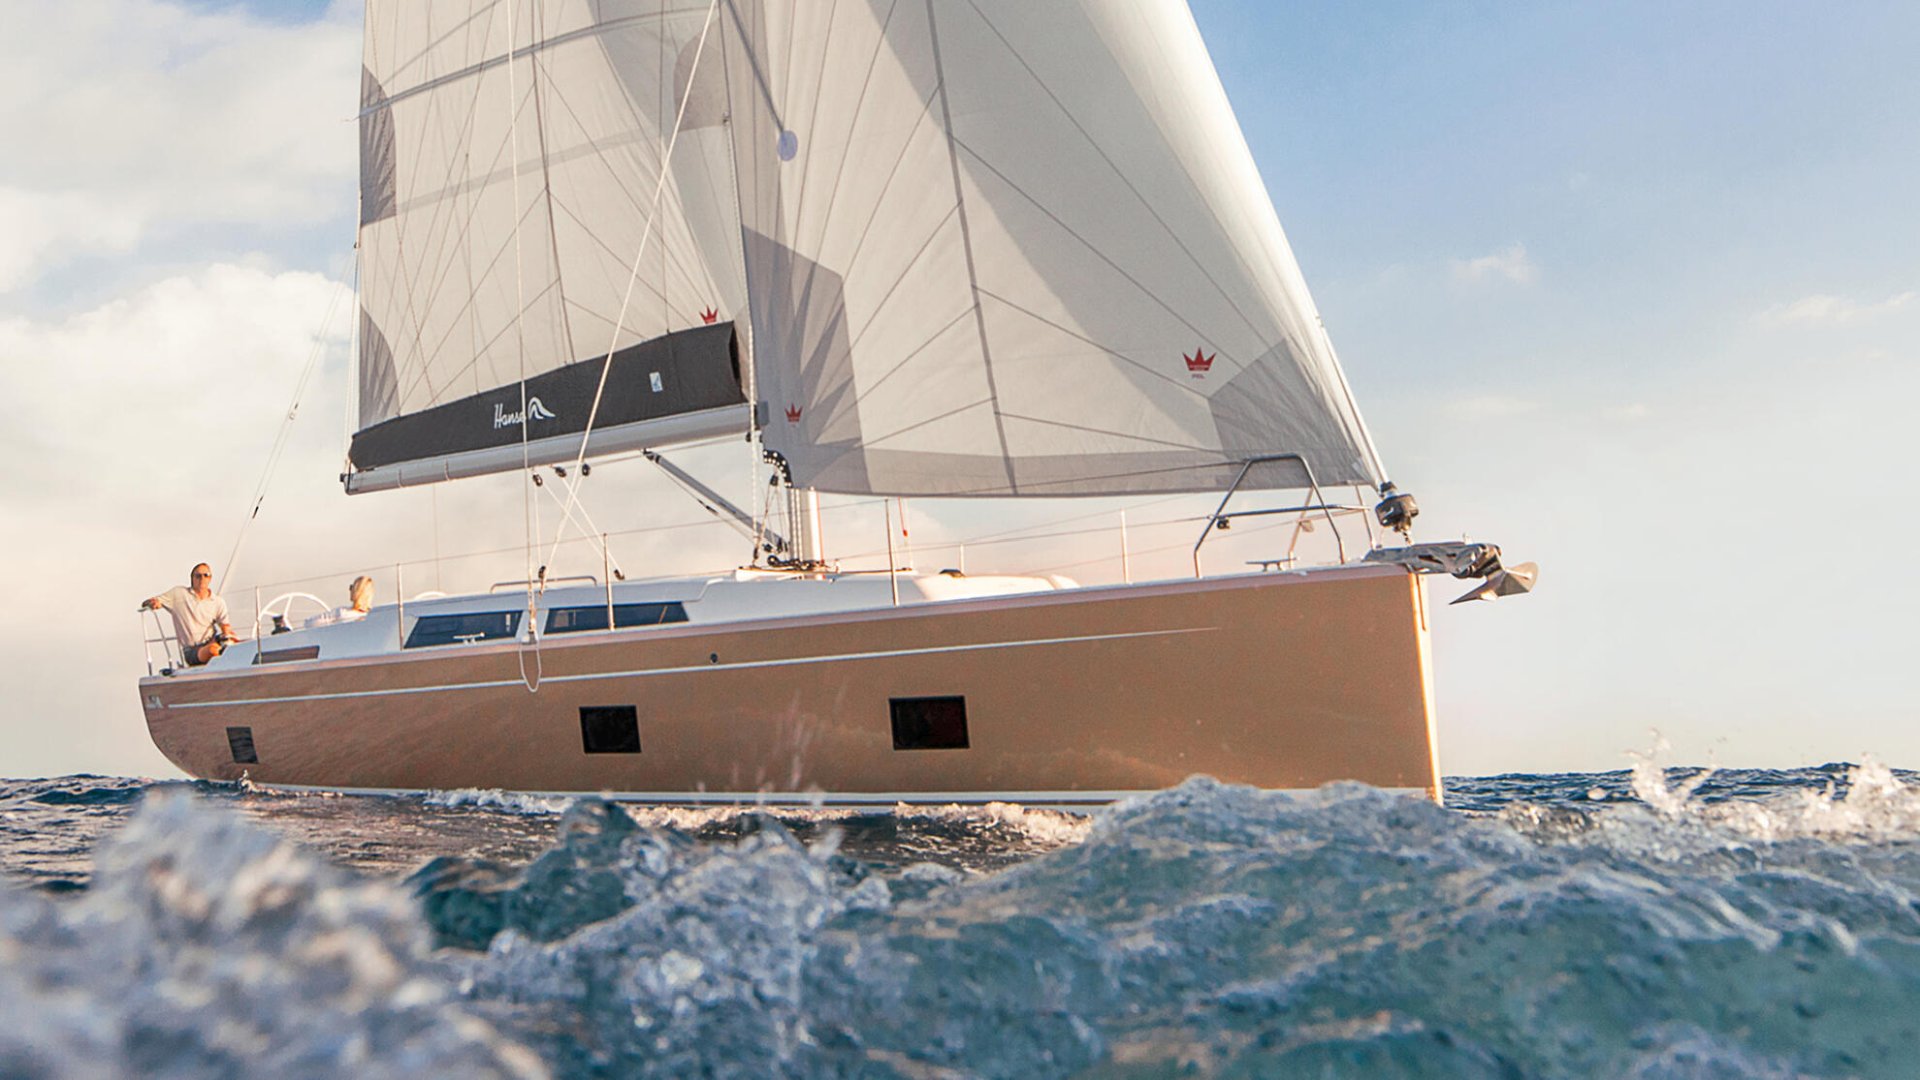 360 VR Virtual Tours of the Hanse 418